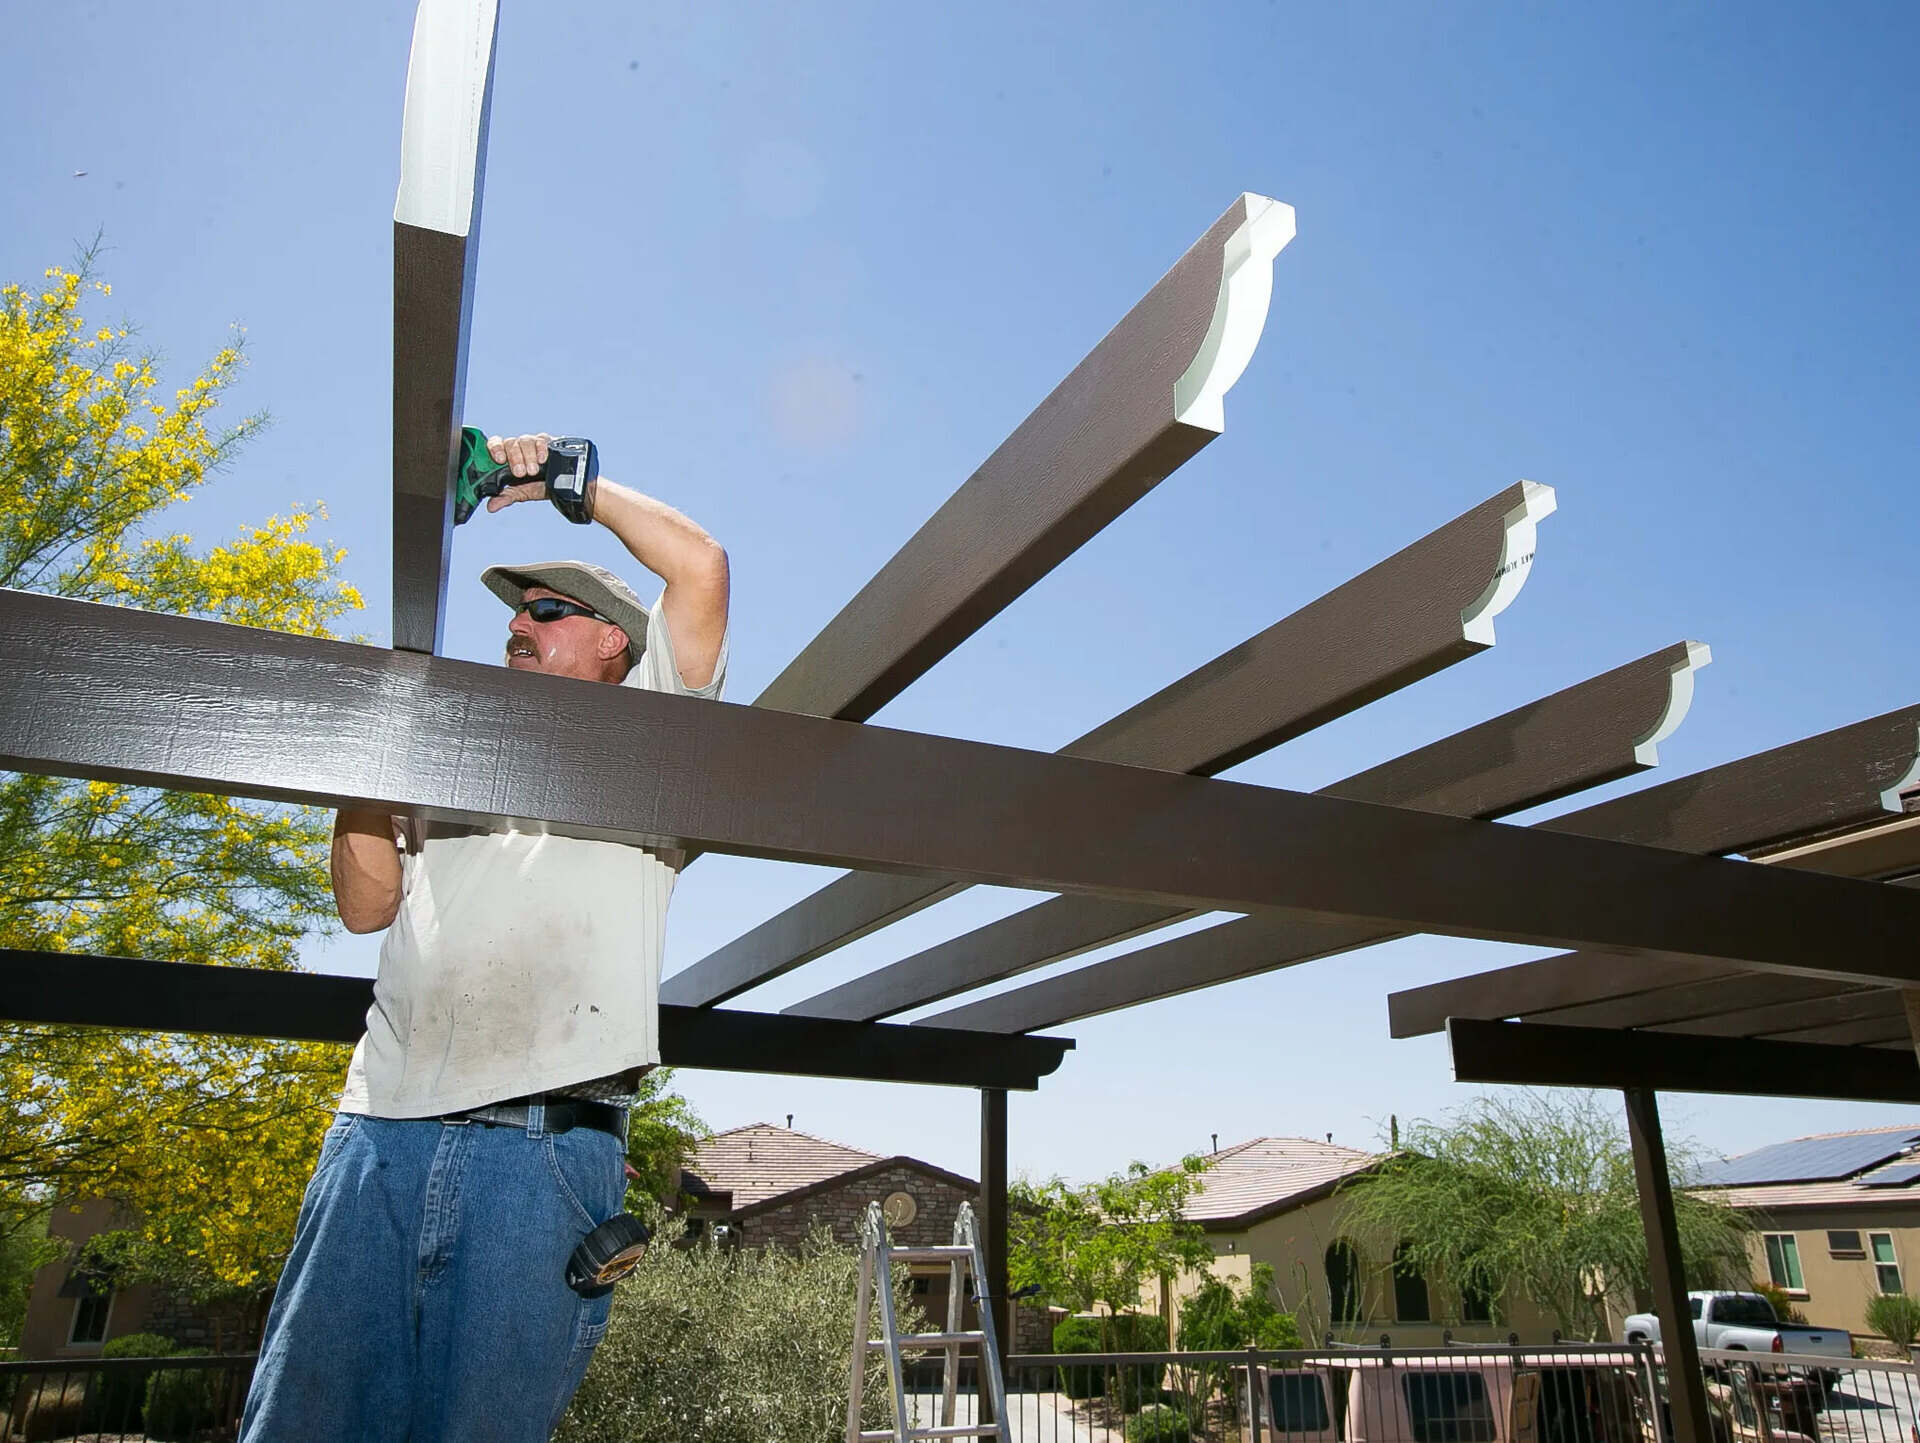 What Kind Of Home Improvements Require Permits In Peoria, AZ?